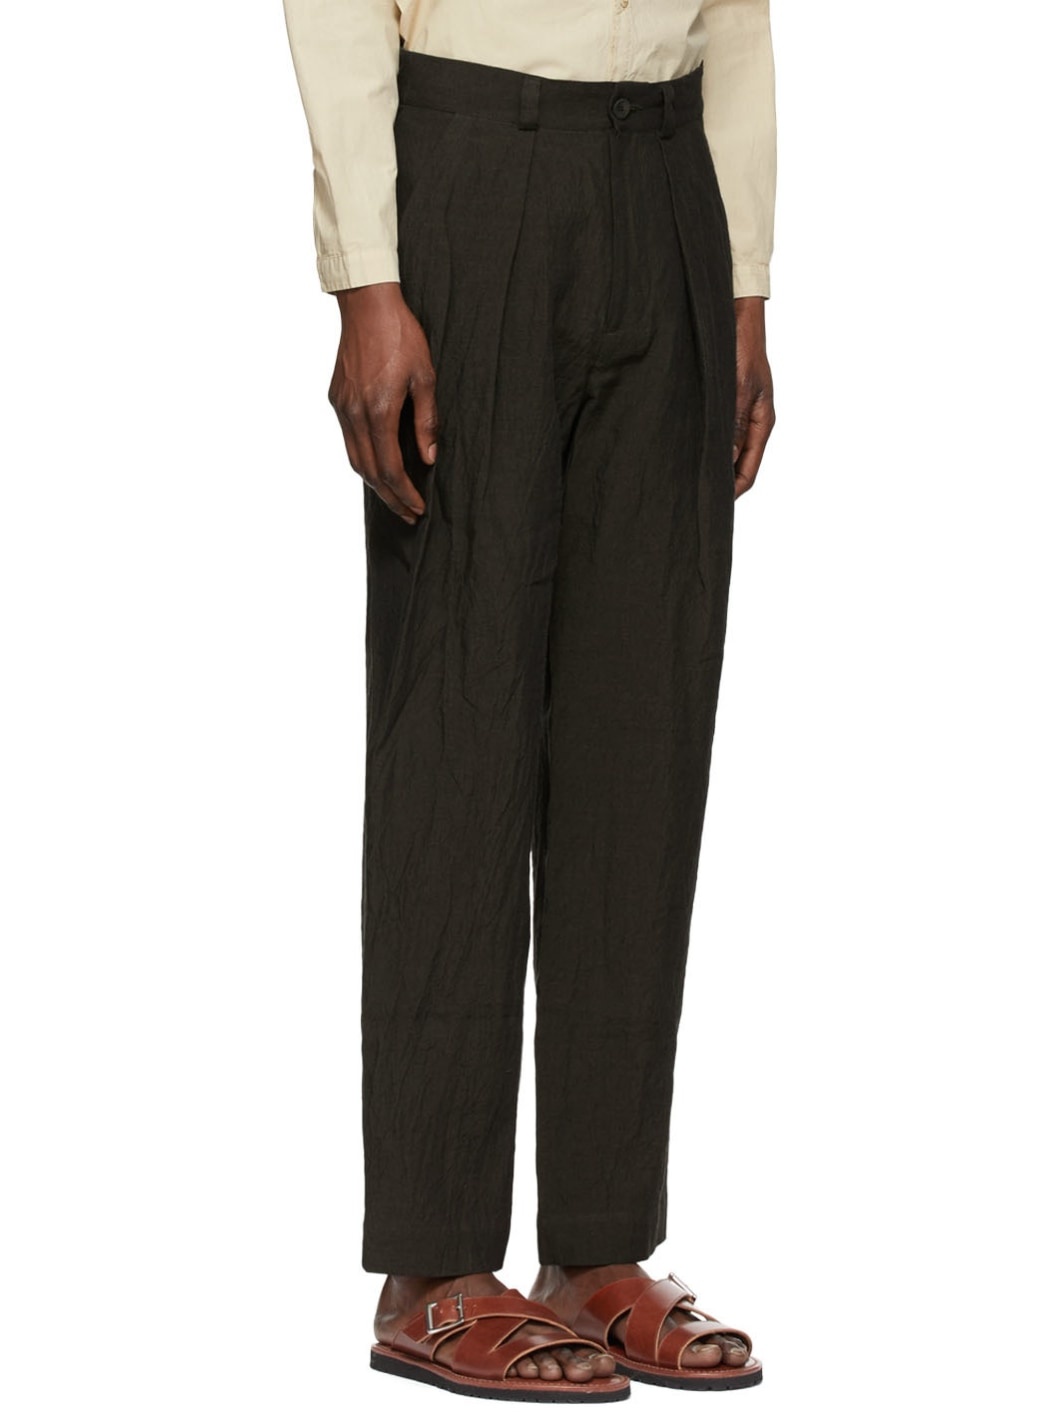 Green 'The Botanist' Trousers - 2